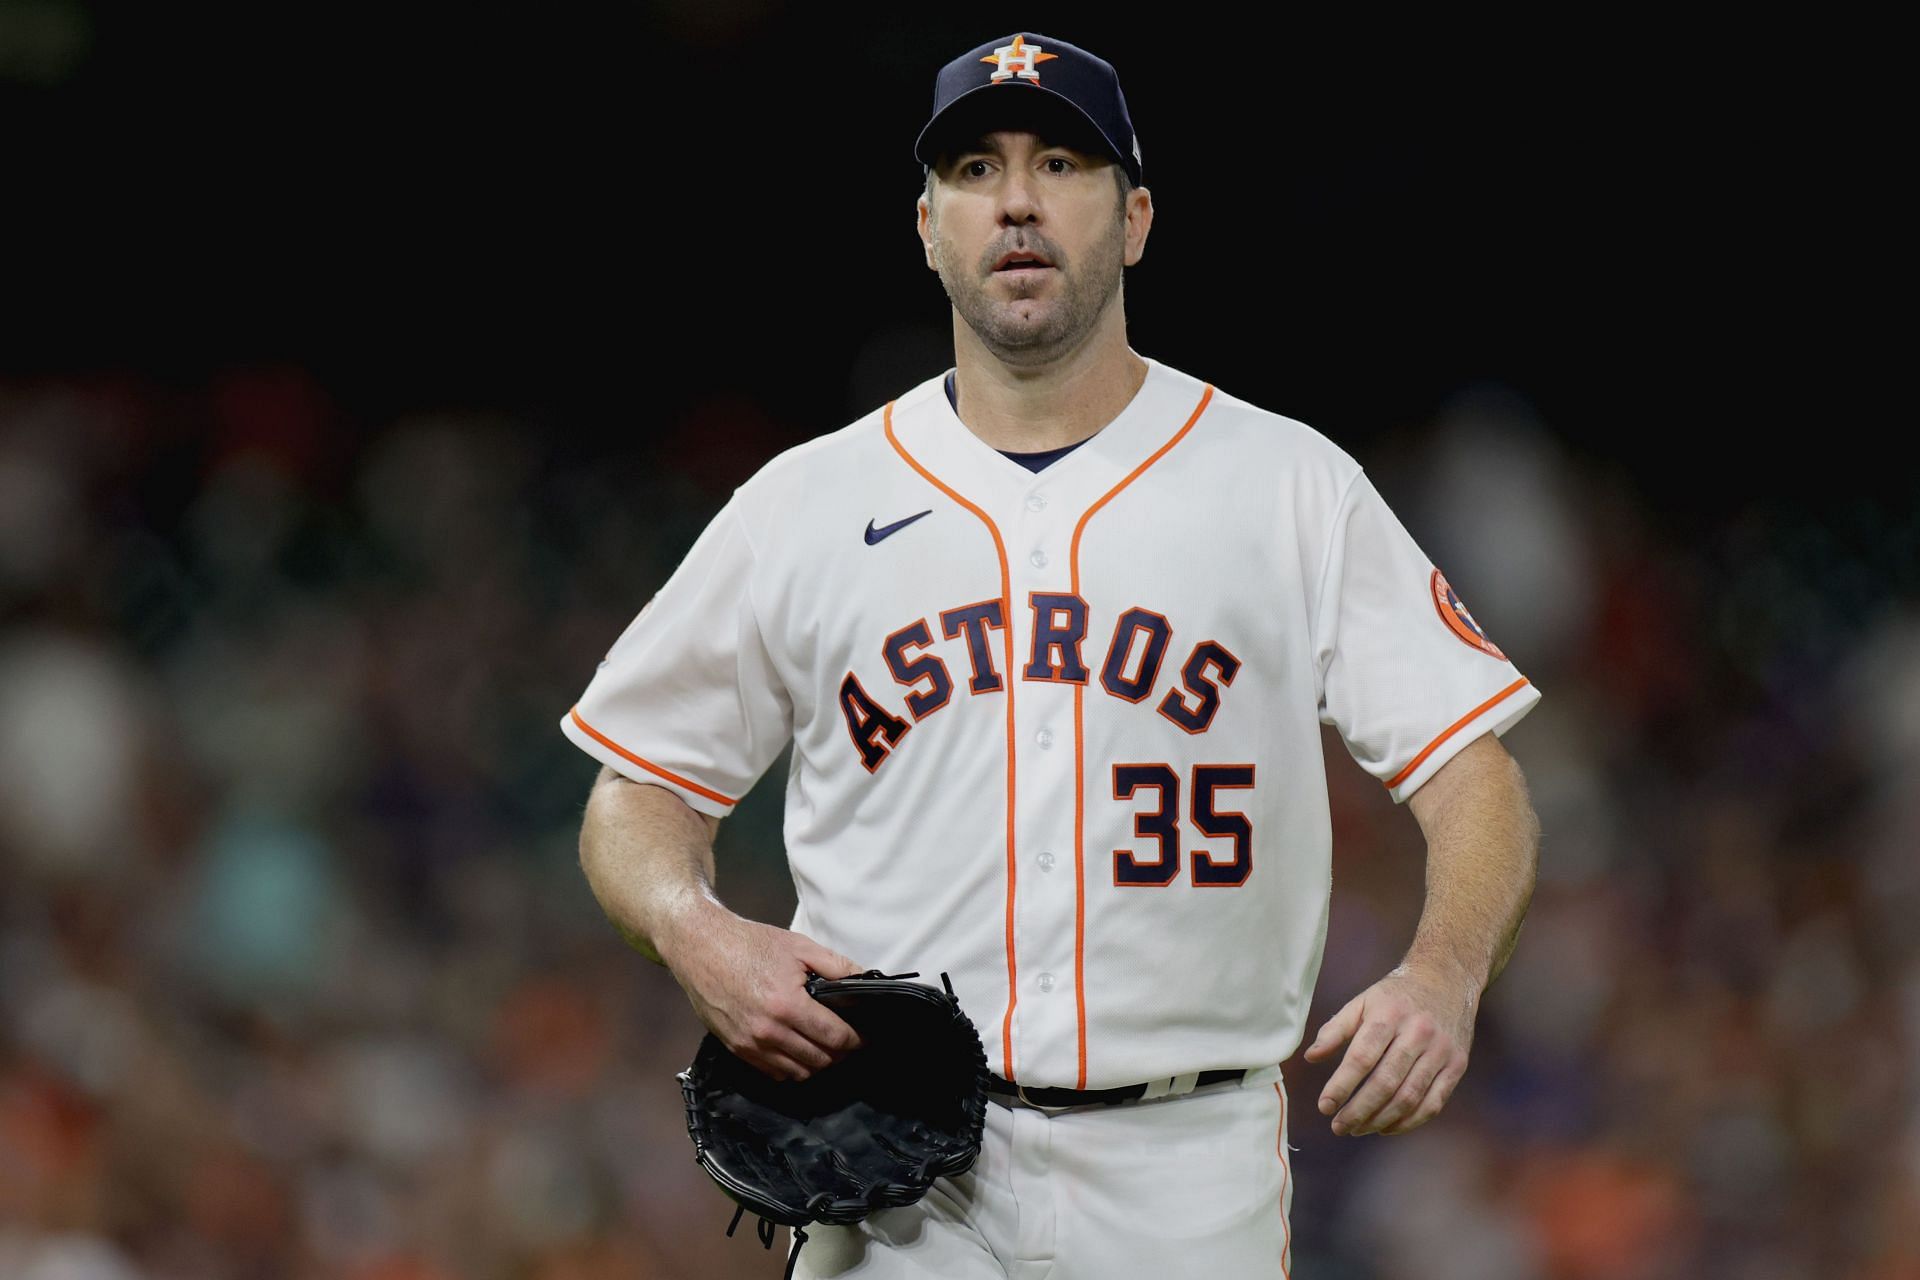 Late-night stunner: Tigers trade ace Verlander to Astros